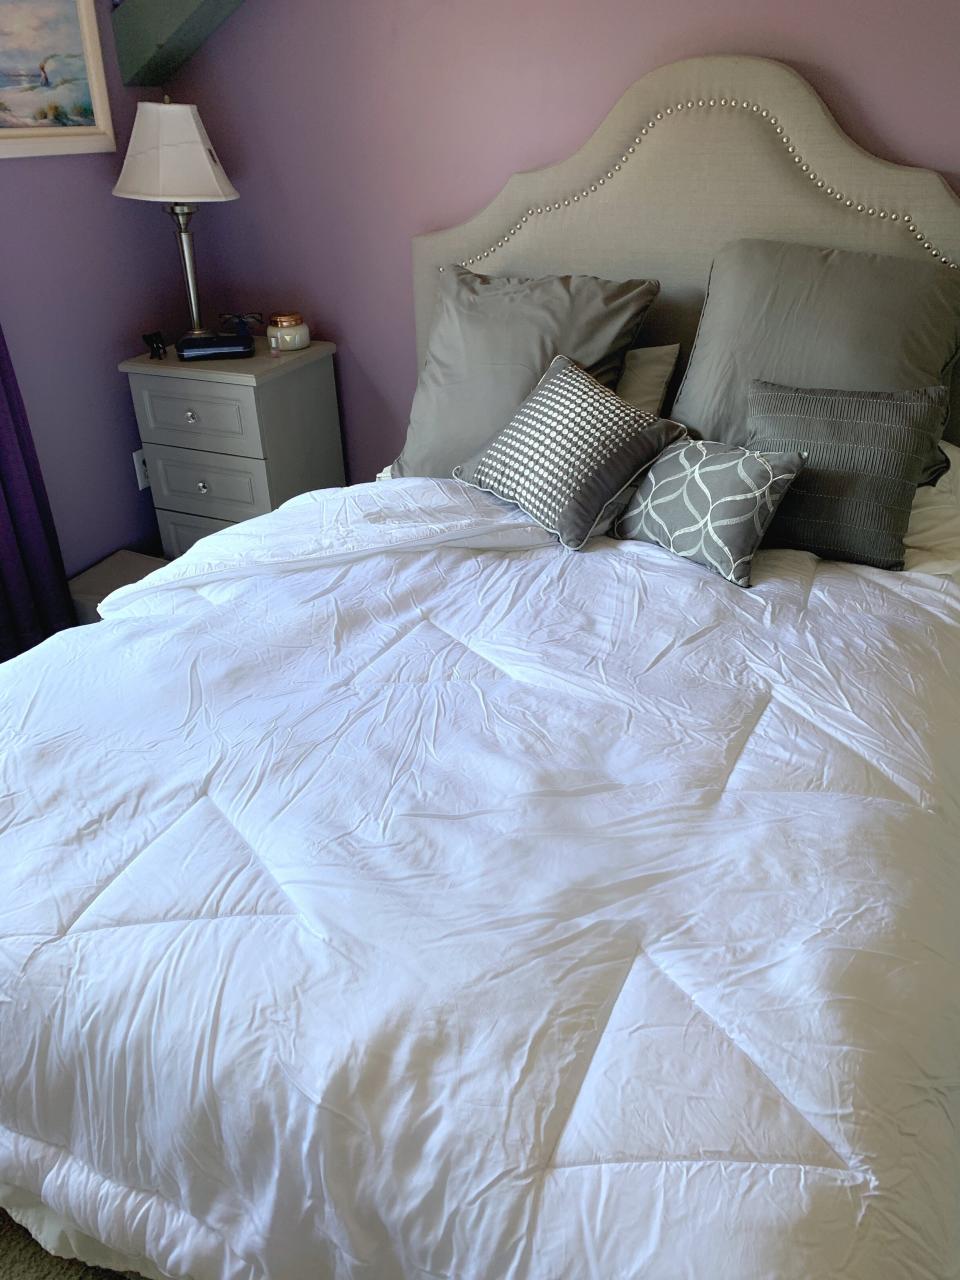 The Buffy Cloud Comforter might cost more than you typically spend on a comforter, but it's a worthwhile investment. (Photo: <a href="https://www.instagram.com/wesleygonz_/" target="_blank">Wesley Gonzalez</a>)